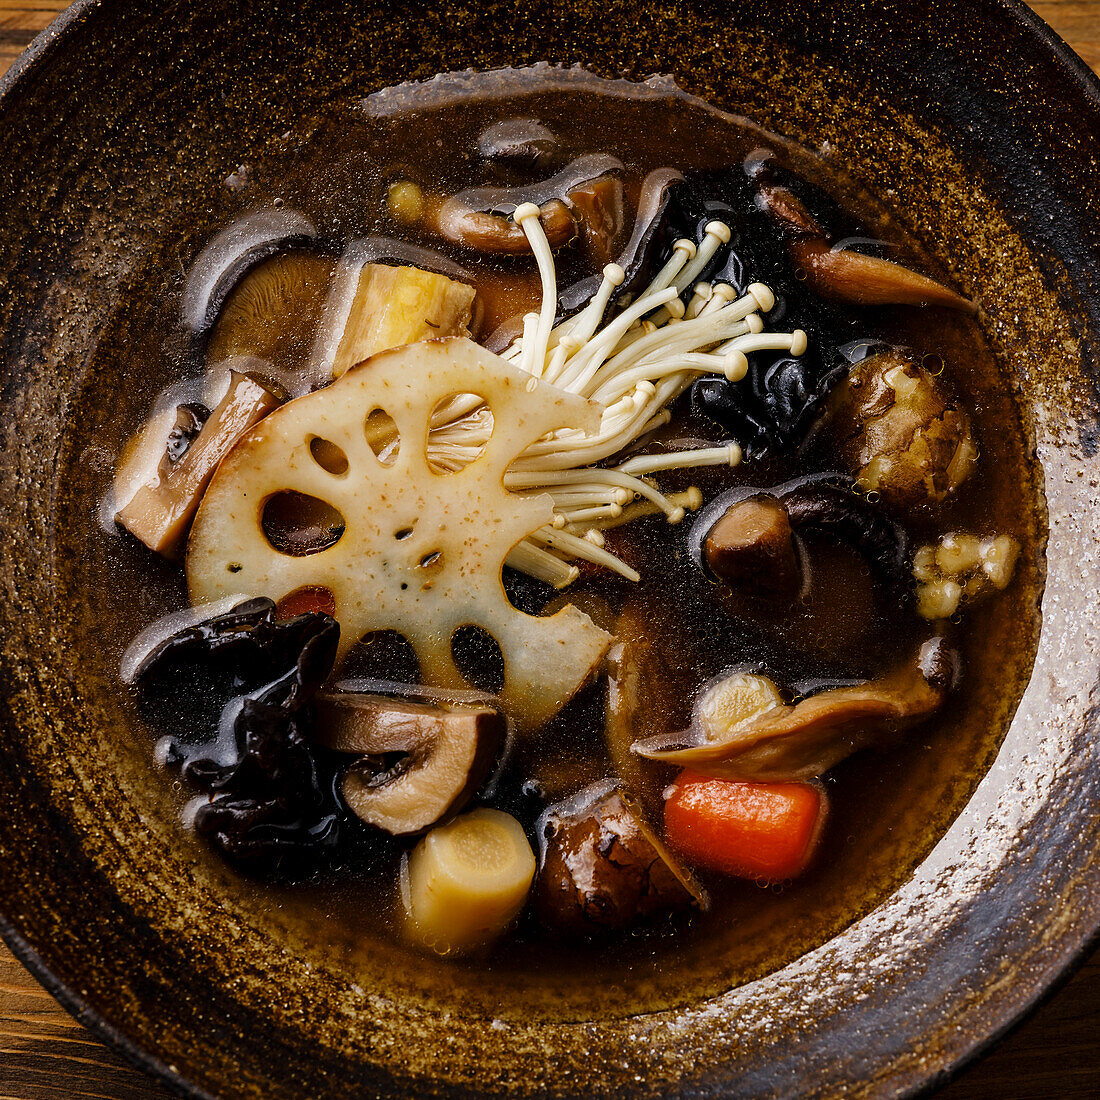 Healing soup with roots, mushrooms and barley on wooden table background